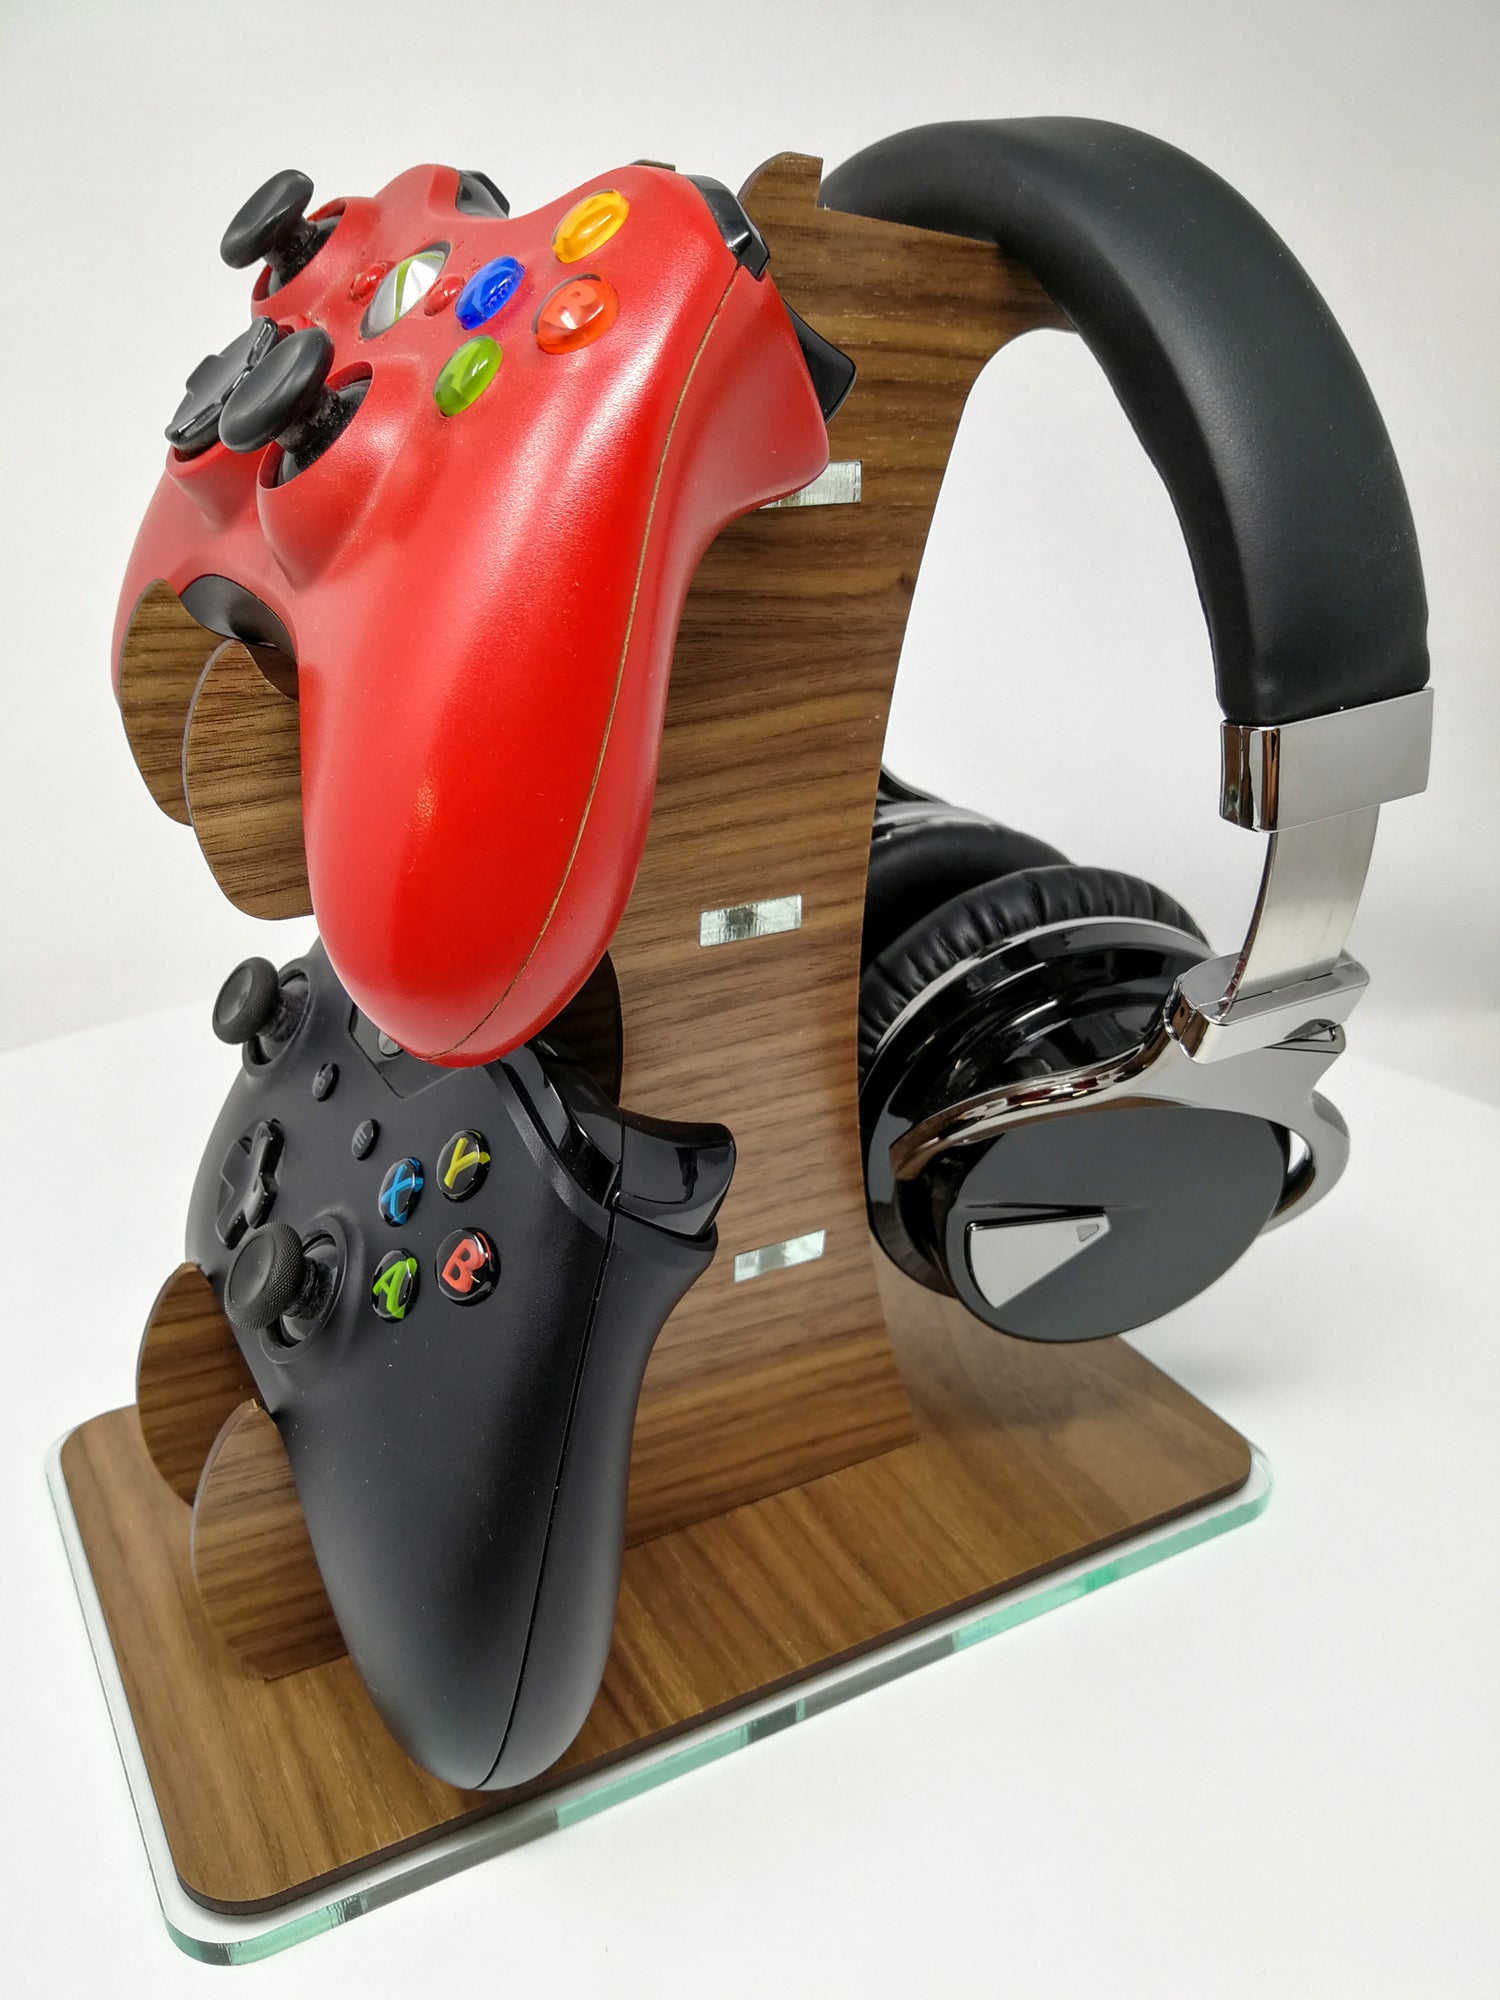 Gaming Stands/Holders